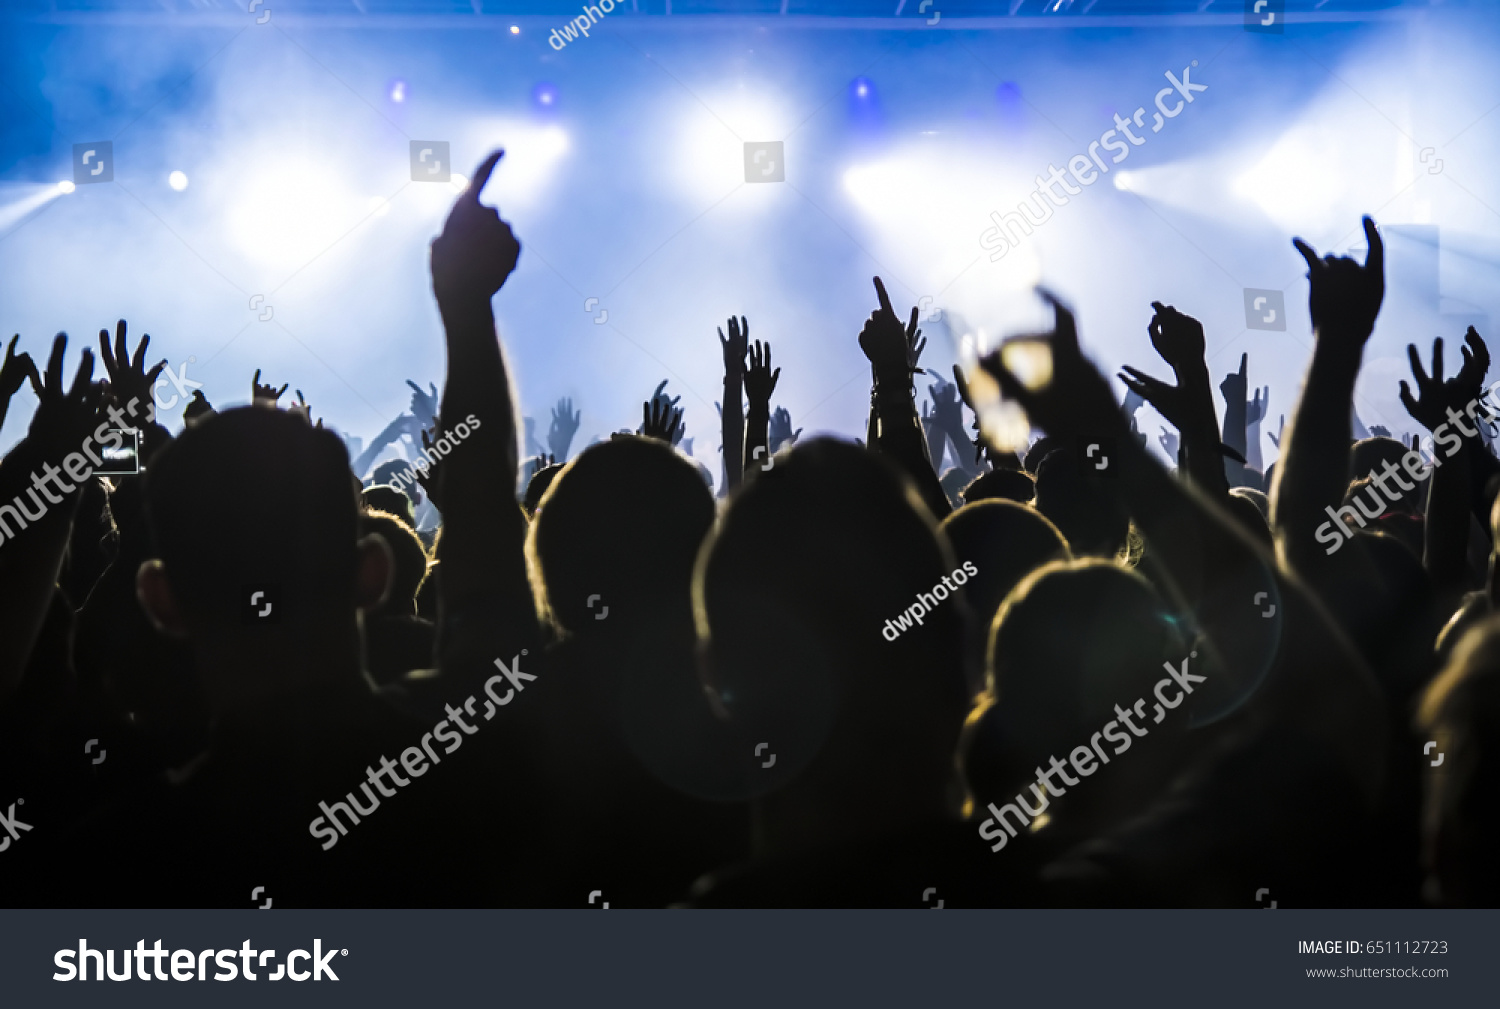 silhouettes of concert crowd in front of bright stage lights #651112723